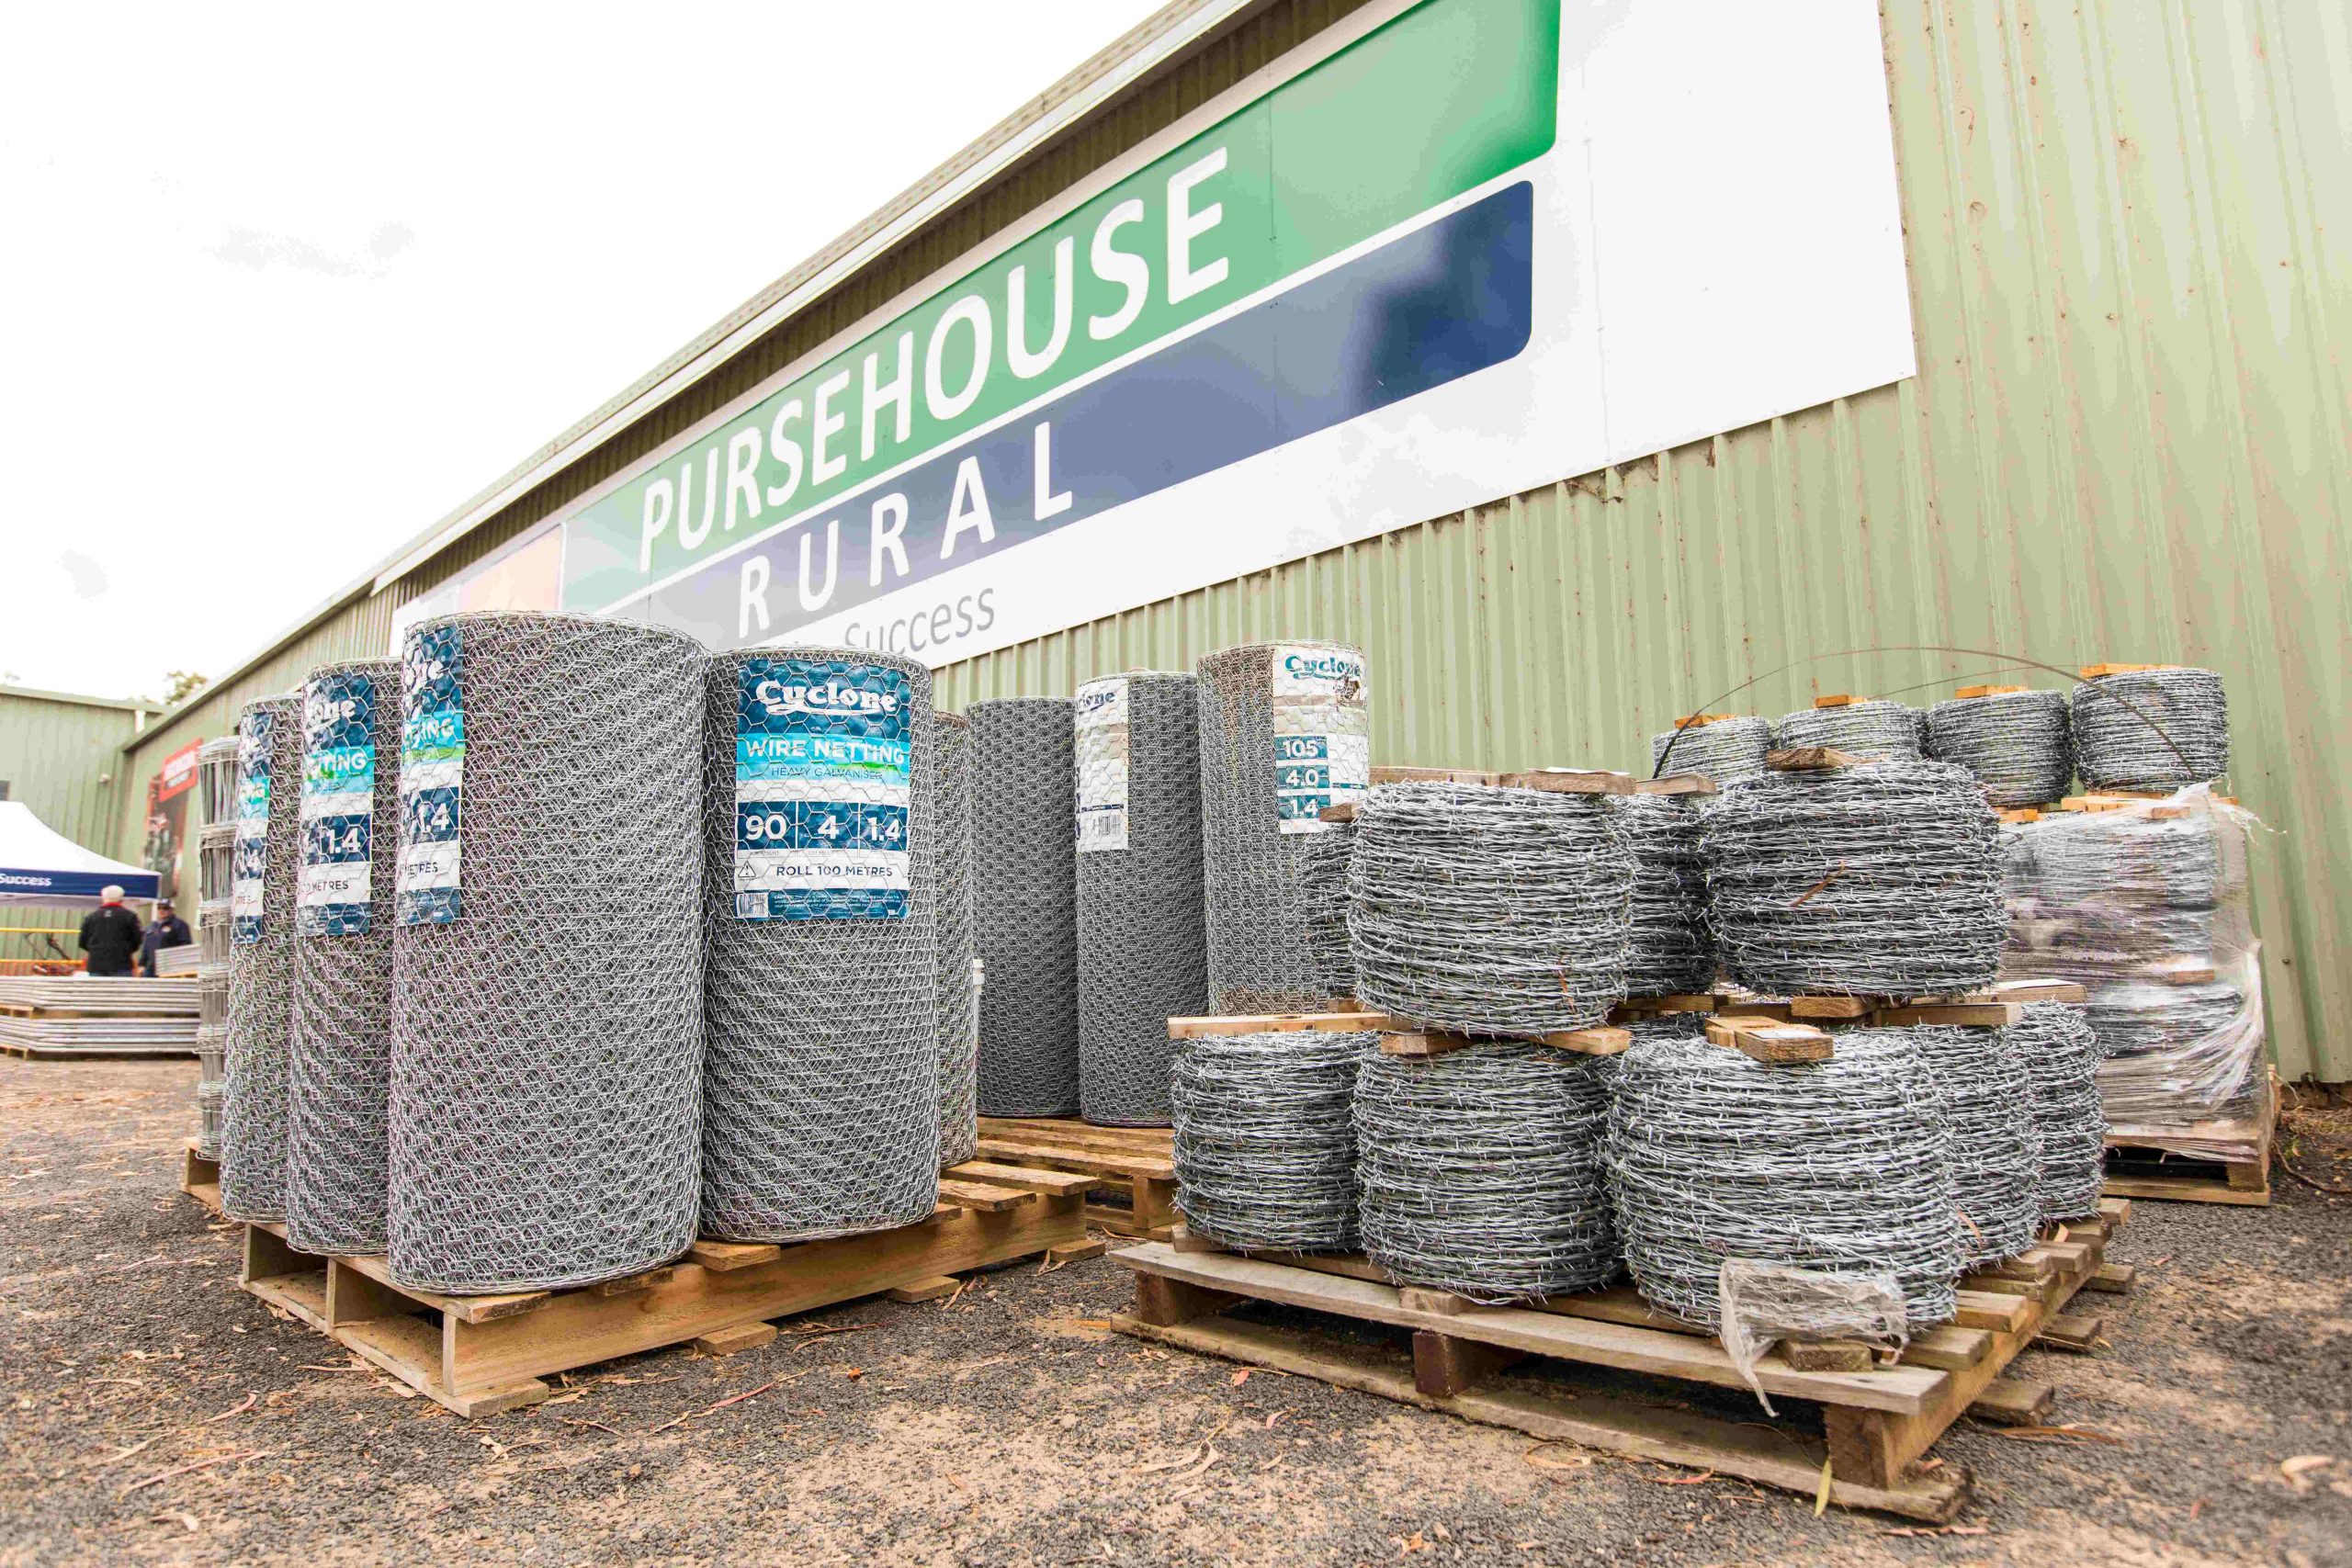 Cyclone rural fencing products displayed outside of pursehouse rural branch